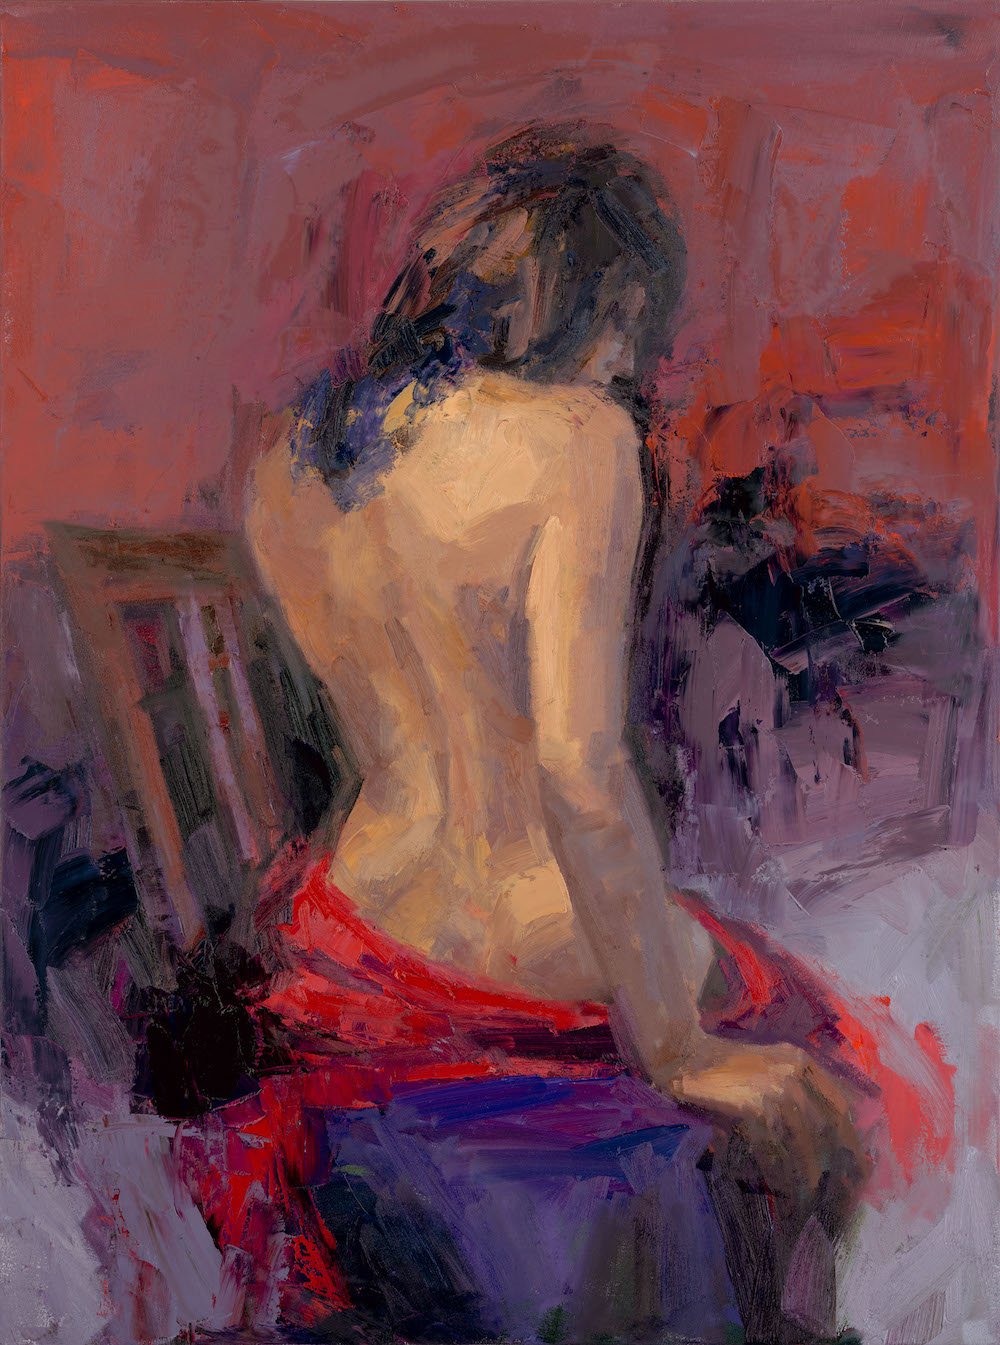 ibestudio Art 18x24 / Figurative / Limited Edition Giclee on Canvas Print Seated Figure - Painting - Giclee on Canvas Print